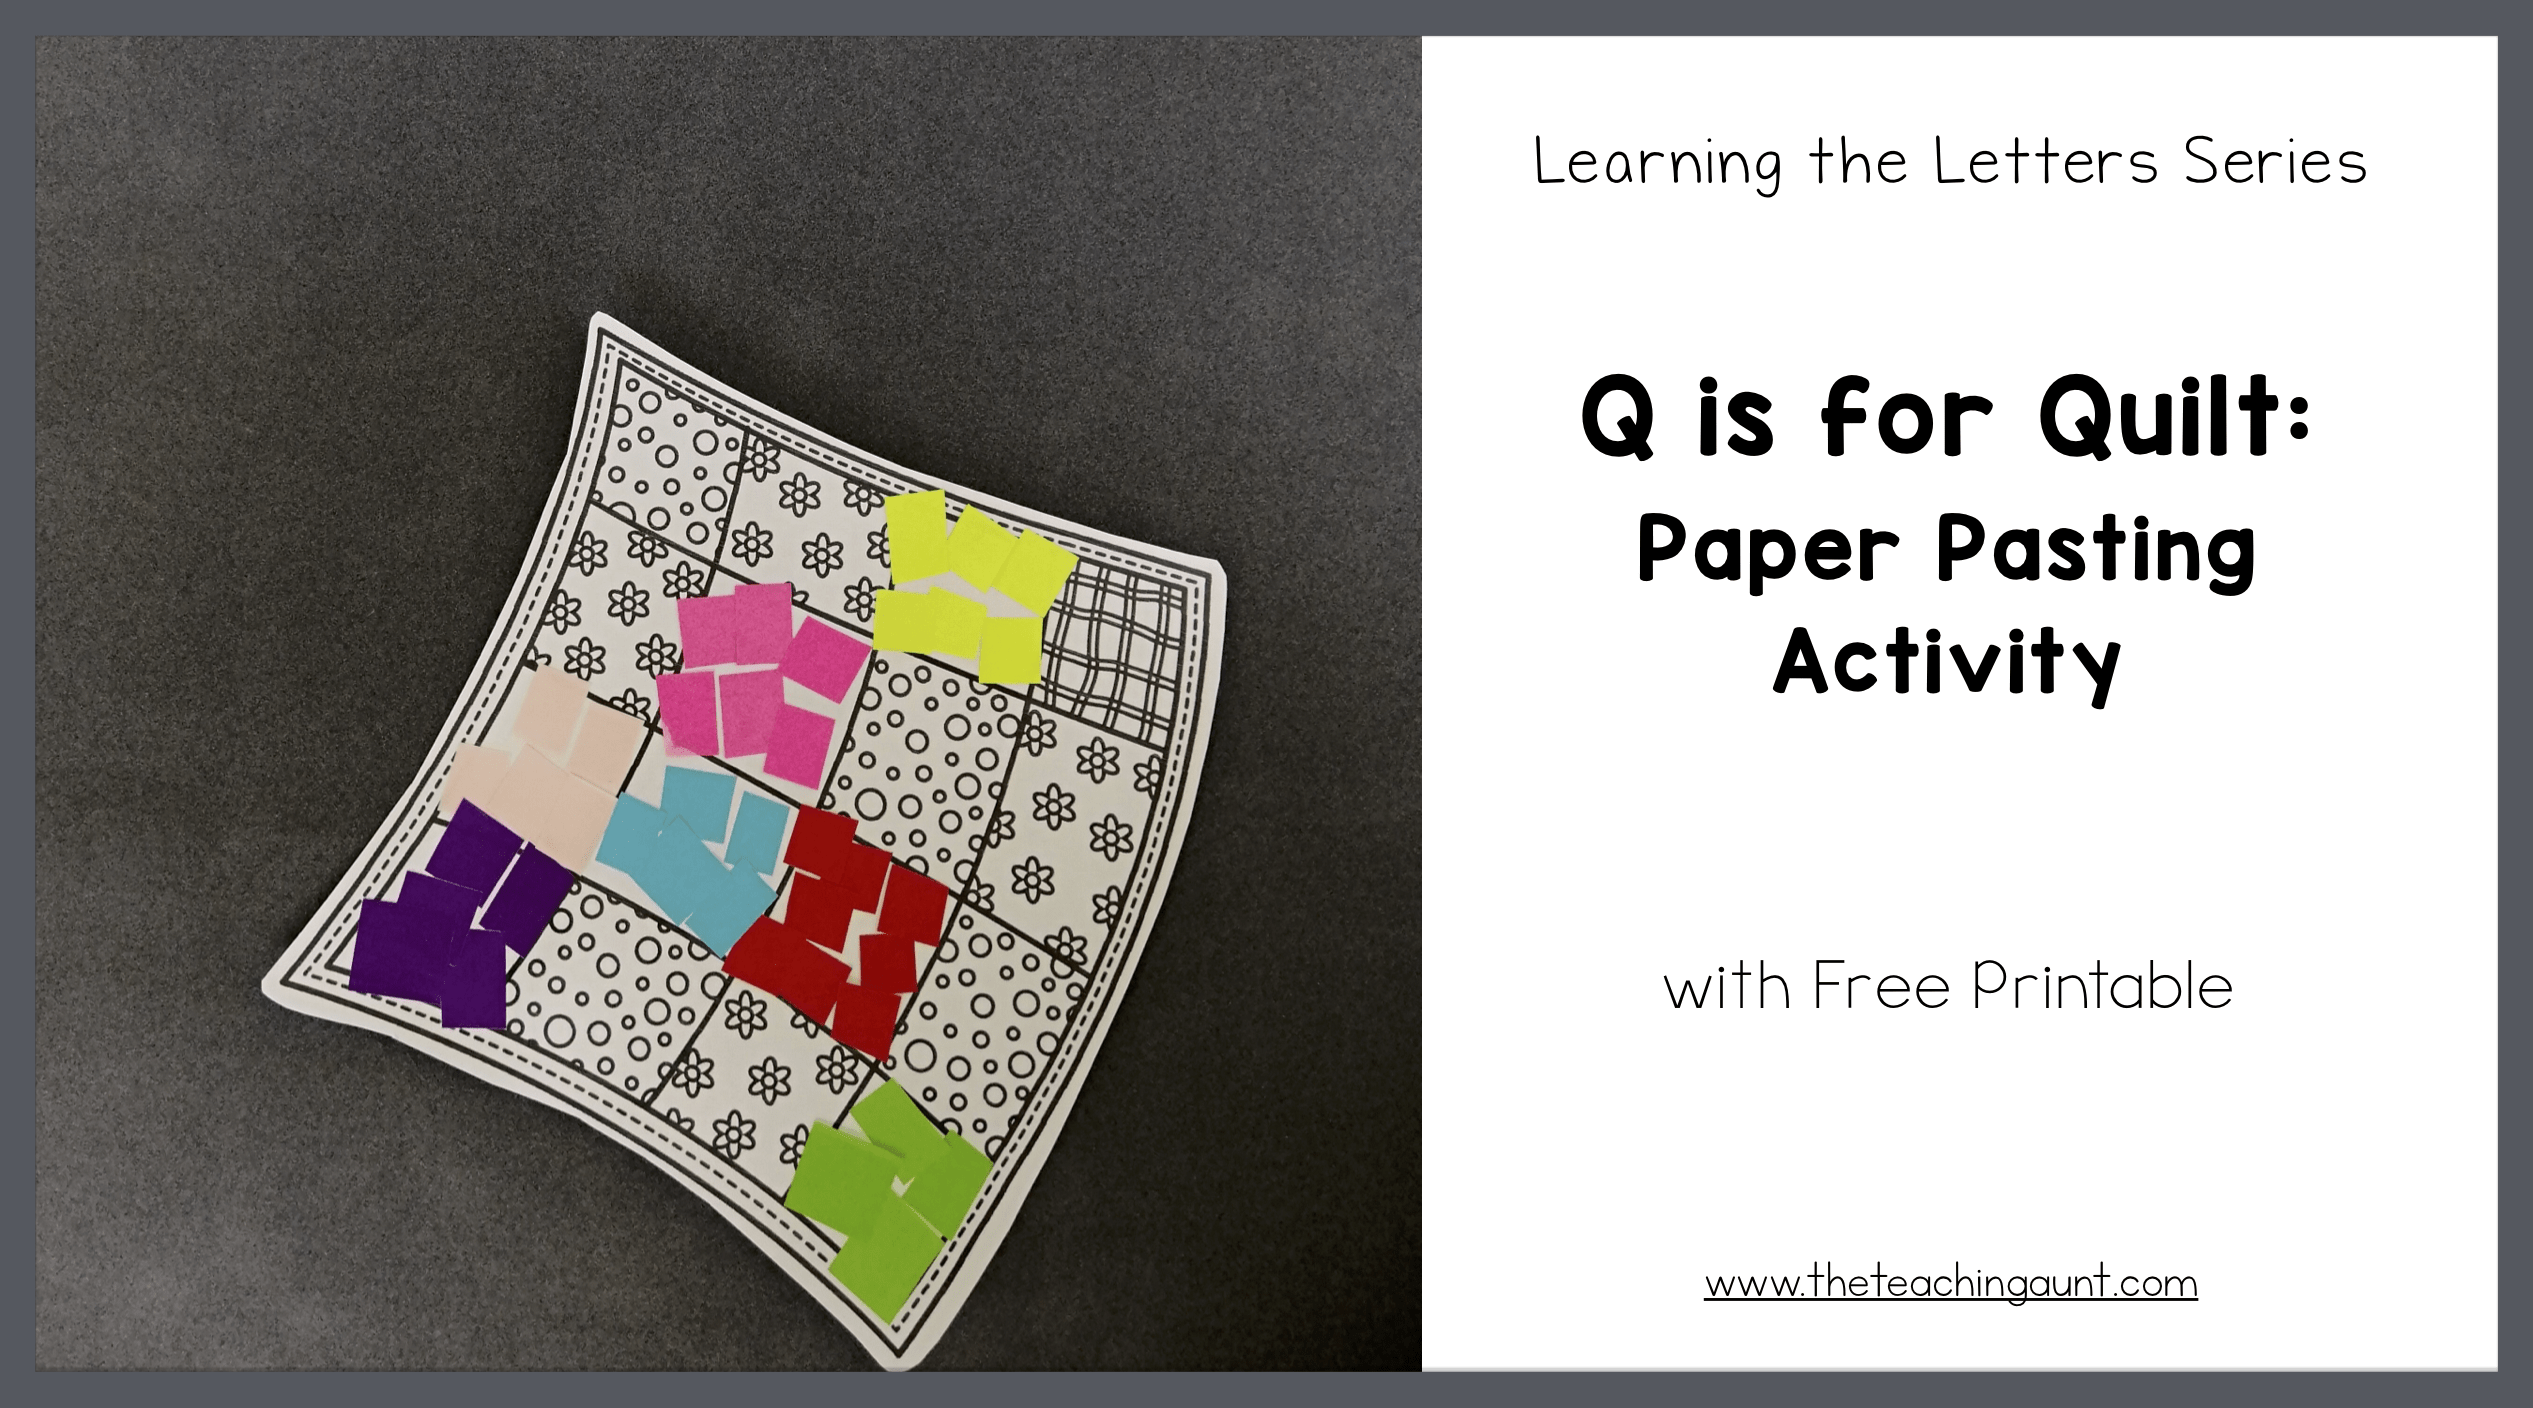 Q is for Quilt: Paper Pasting Activity from The Teaching Aunt